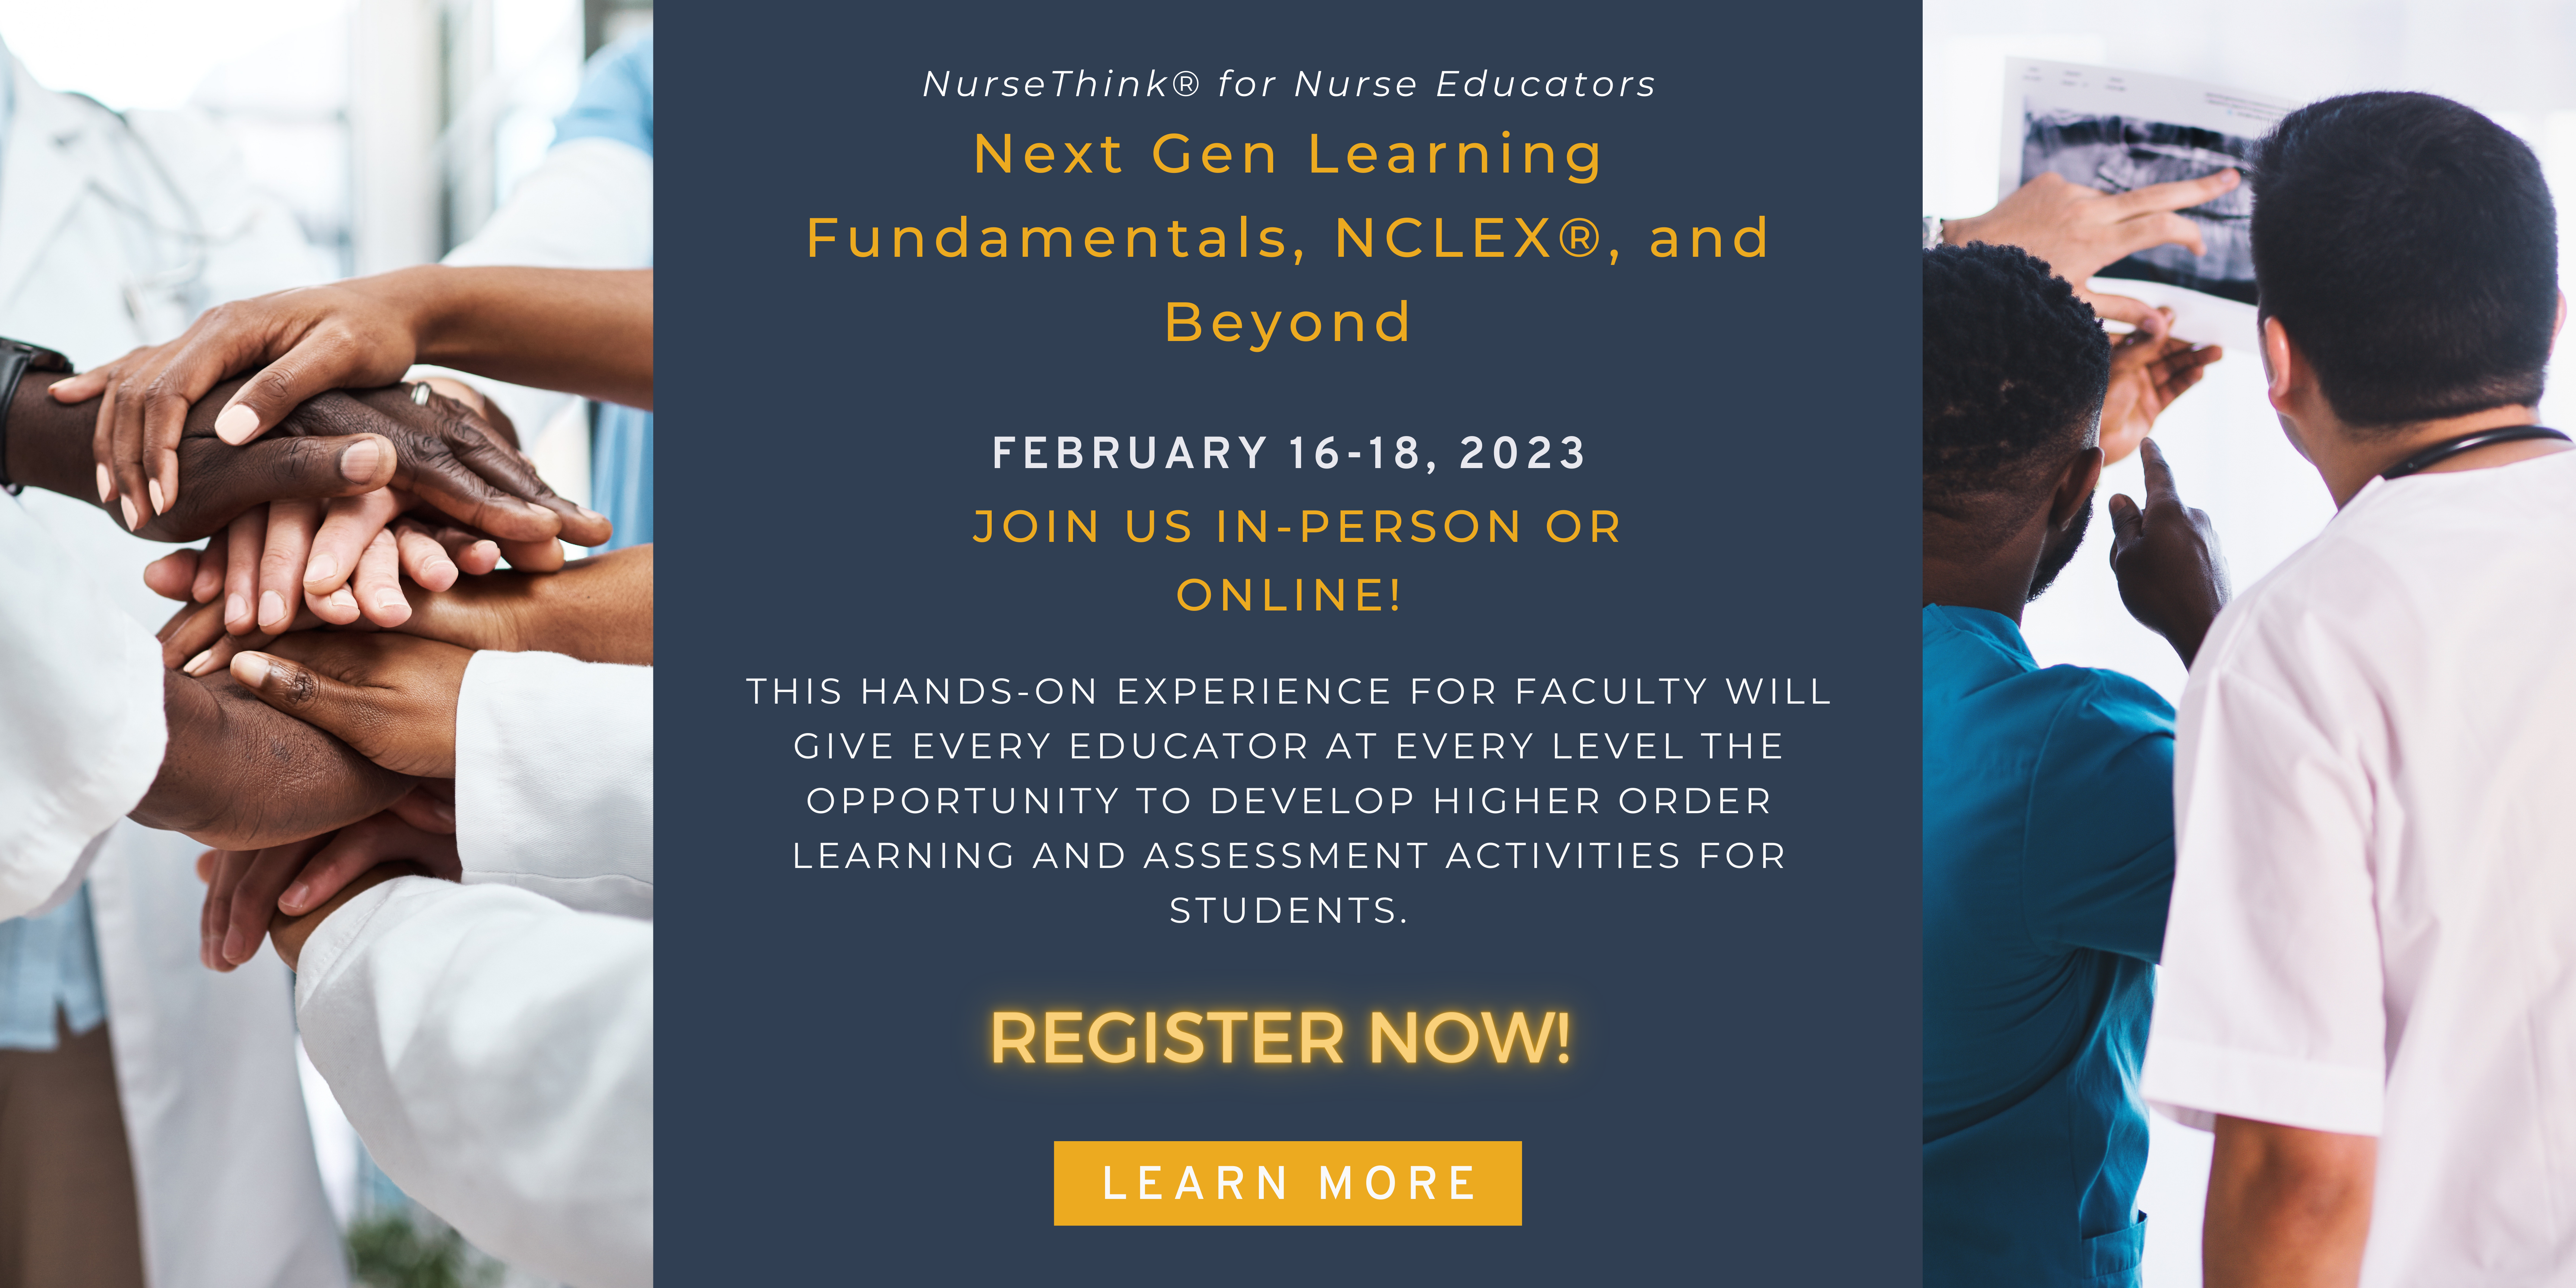 Next Gen Learning Fudnamentals, NCLEX, and Beyond; February 16-18, 2023; Join Us In-Person or Online!